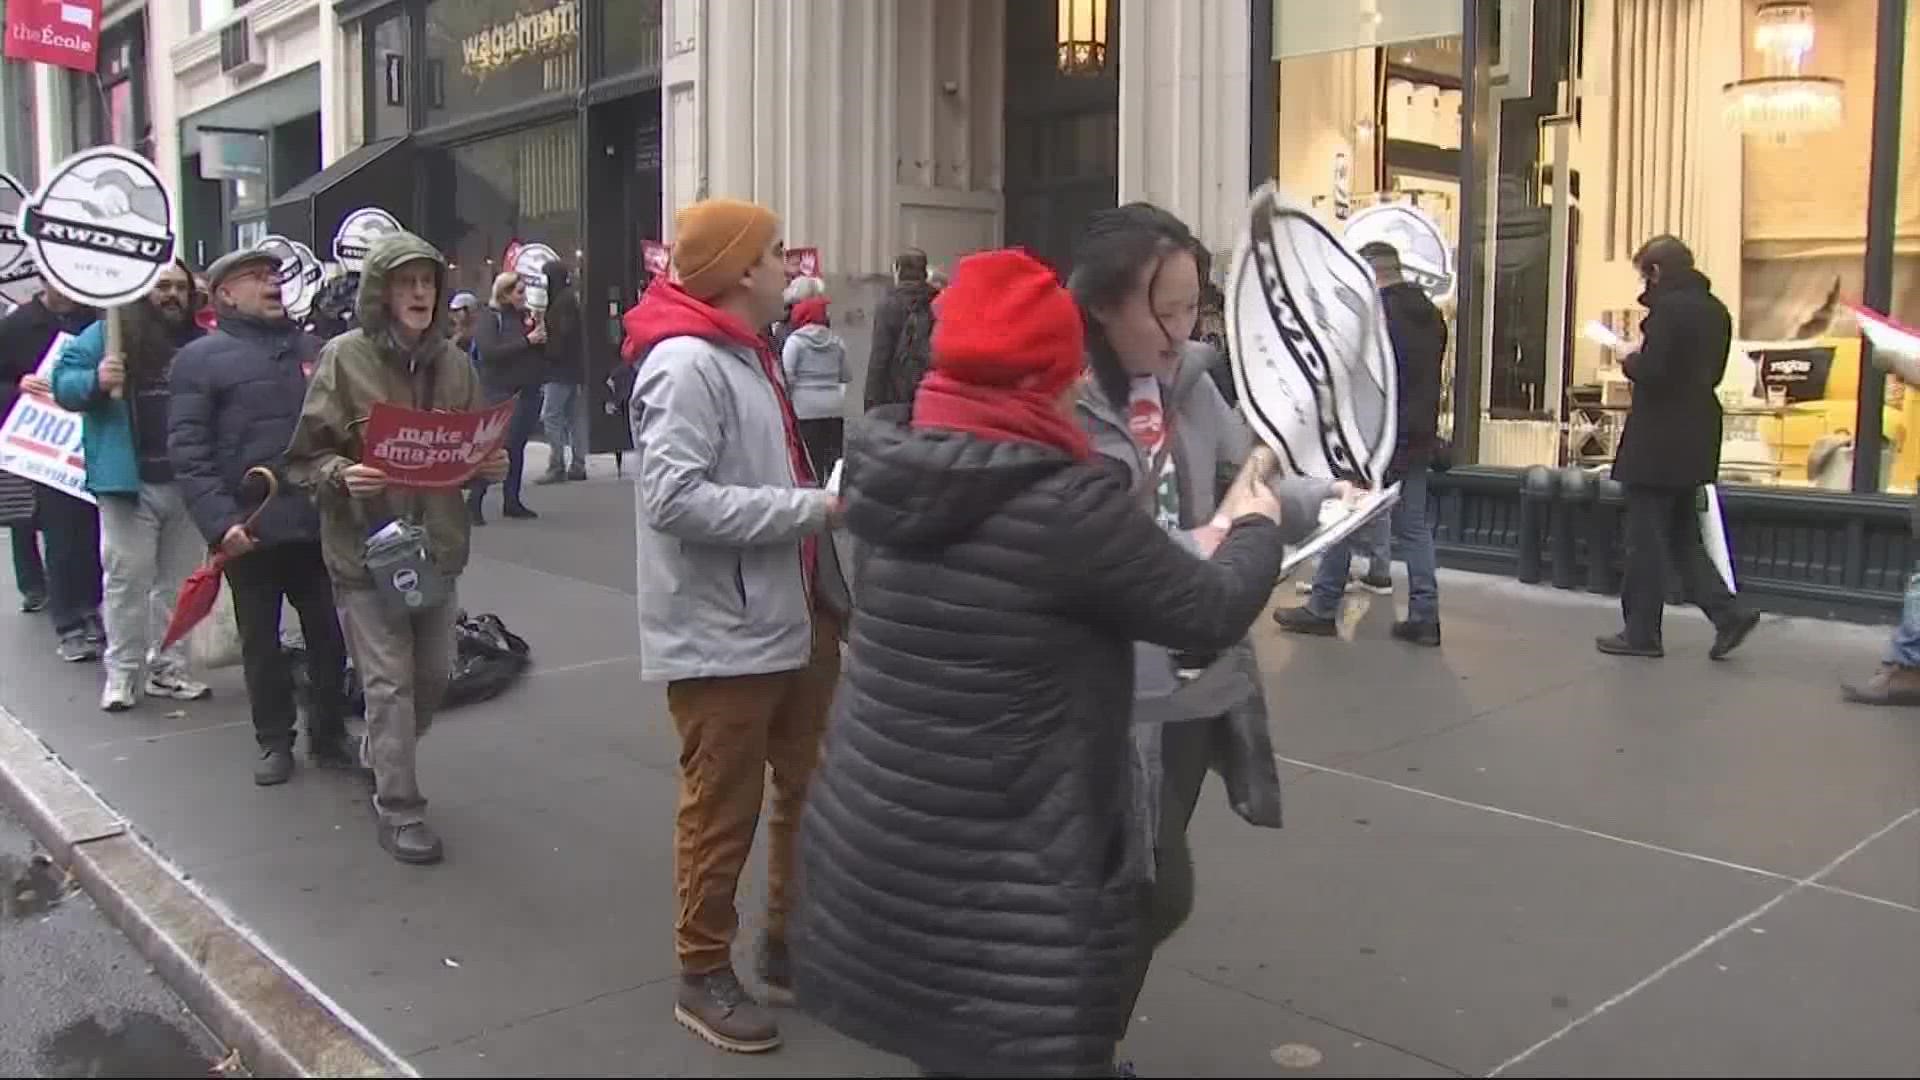 The protest took place on Black Friday.